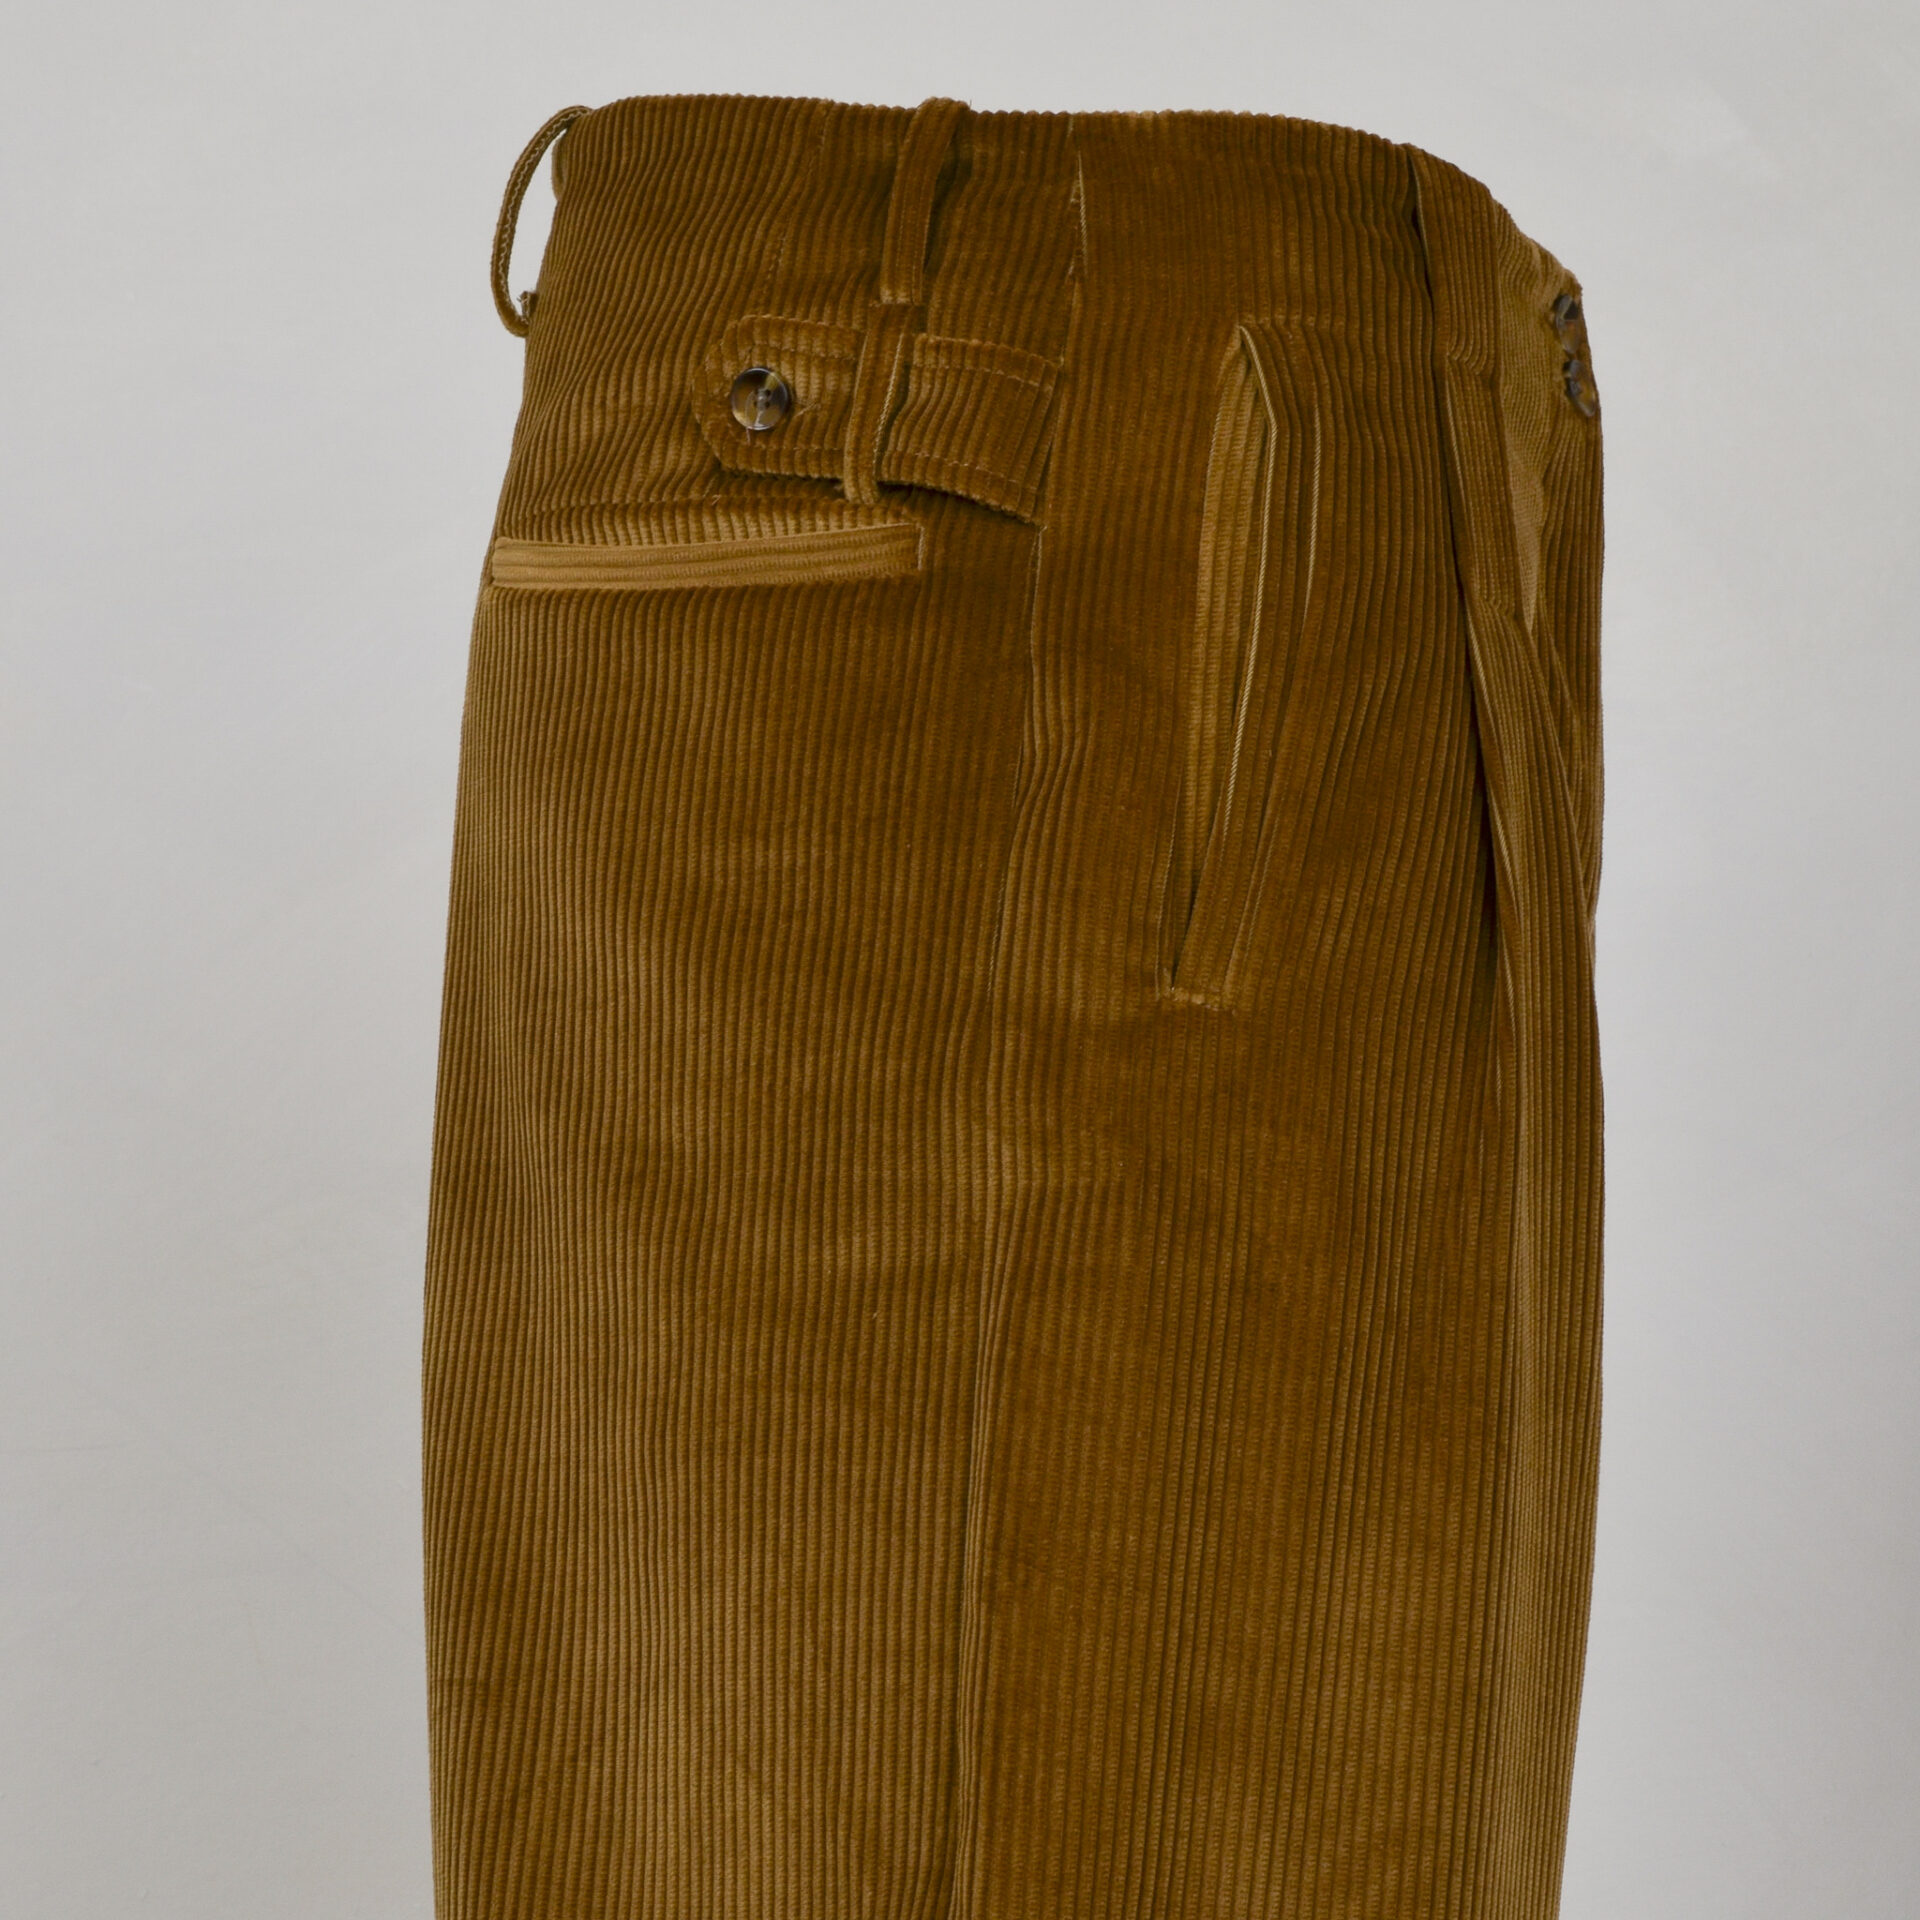 QUIN & DONNELLY Gold Slightly Tapered Ladies' Trousers - Size UK 14 £19.99  - PicClick UK